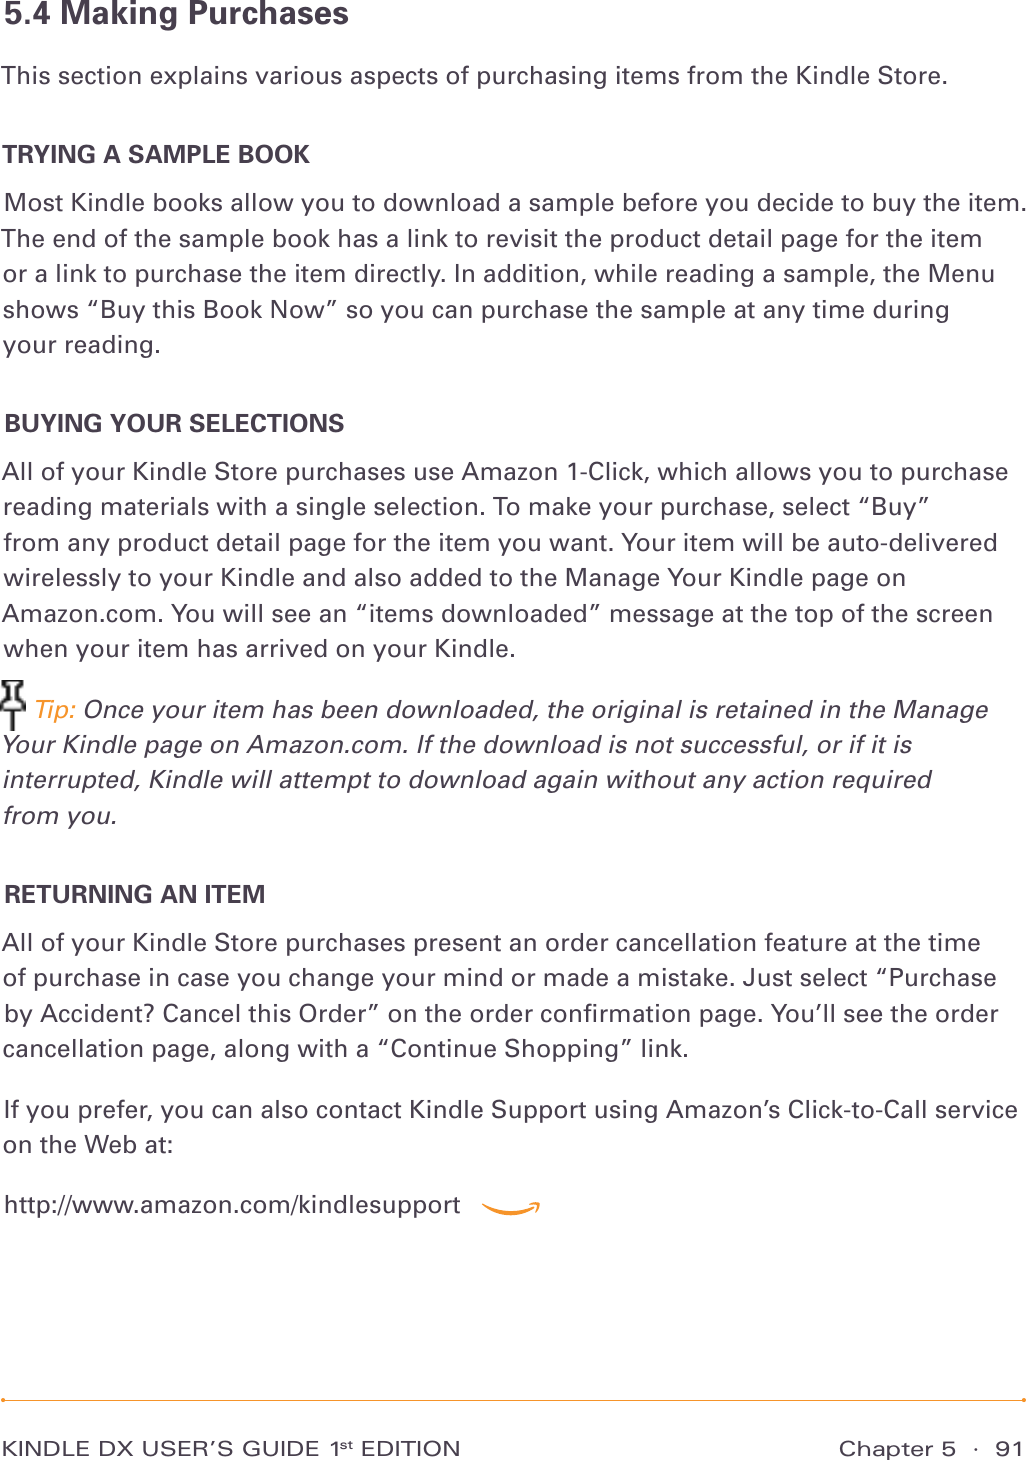 Chapter 5  ·  91KINDLE DX USER’S GUIDE 1st EDITION5.4 Making PurchasesThis section explains various aspects of purchasing items from the Kindle Store.TRYING A SAMPLE BOOKMost Kindle books allow you to download a sample before you decide to buy the item. The end of the sample book has a link to revisit the product detail page for the item or a link to purchase the item directly. In addition, while reading a sample, the Menu shows “Buy this Book Now” so you can purchase the sample at any time during  your reading.BUYING YOUR SELECTIONSAll of your Kindle Store purchases use Amazon 1-Click, which allows you to purchase reading materials with a single selection. To make your purchase, select “Buy”  from any product detail page for the item you want. Your item will be auto-delivered wirelessly to your Kindle and also added to the Manage Your Kindle page on  Amazon.com. You will see an “items downloaded” message at the top of the screen when your item has arrived on your Kindle. Tip: Once your item has been downloaded, the original is retained in the Manage Your Kindle page on Amazon.com. If the download is not successful, or if it is interrupted, Kindle will attempt to download again without any action required  from you.RETURNING AN ITEMAll of your Kindle Store purchases present an order cancellation feature at the time of purchase in case you change your mind or made a mistake. Just select “Purchase by Accident? Cancel this Order” on the order conﬁrmation page. You’ll see the order cancellation page, along with a “Continue Shopping” link.If you prefer, you can also contact Kindle Support using Amazon’s Click-to-Call service on the Web at:http://www.amazon.com/kindlesupport